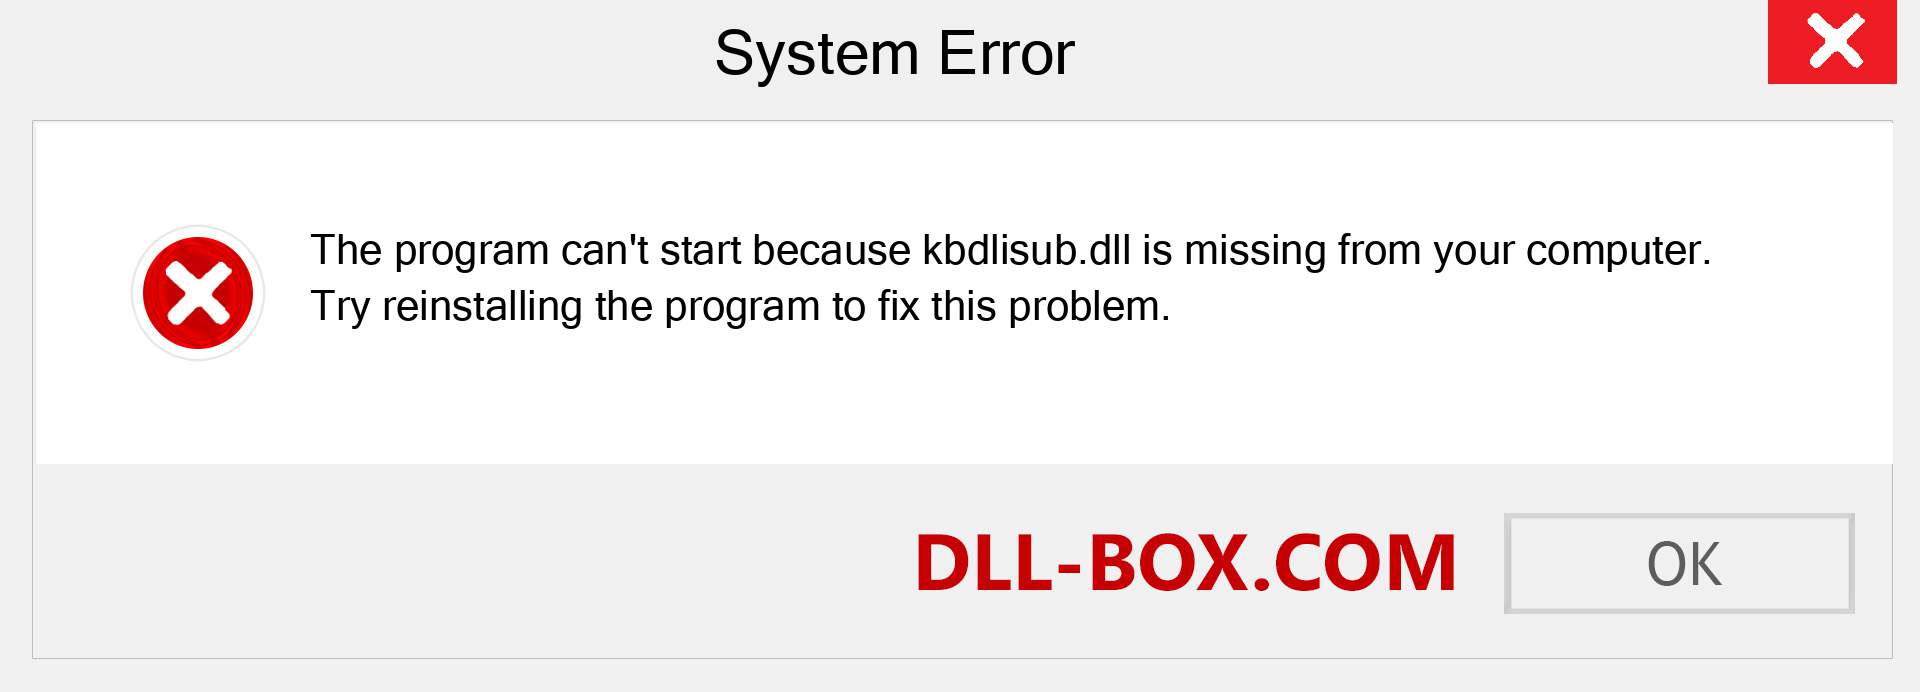  kbdlisub.dll file is missing?. Download for Windows 7, 8, 10 - Fix  kbdlisub dll Missing Error on Windows, photos, images